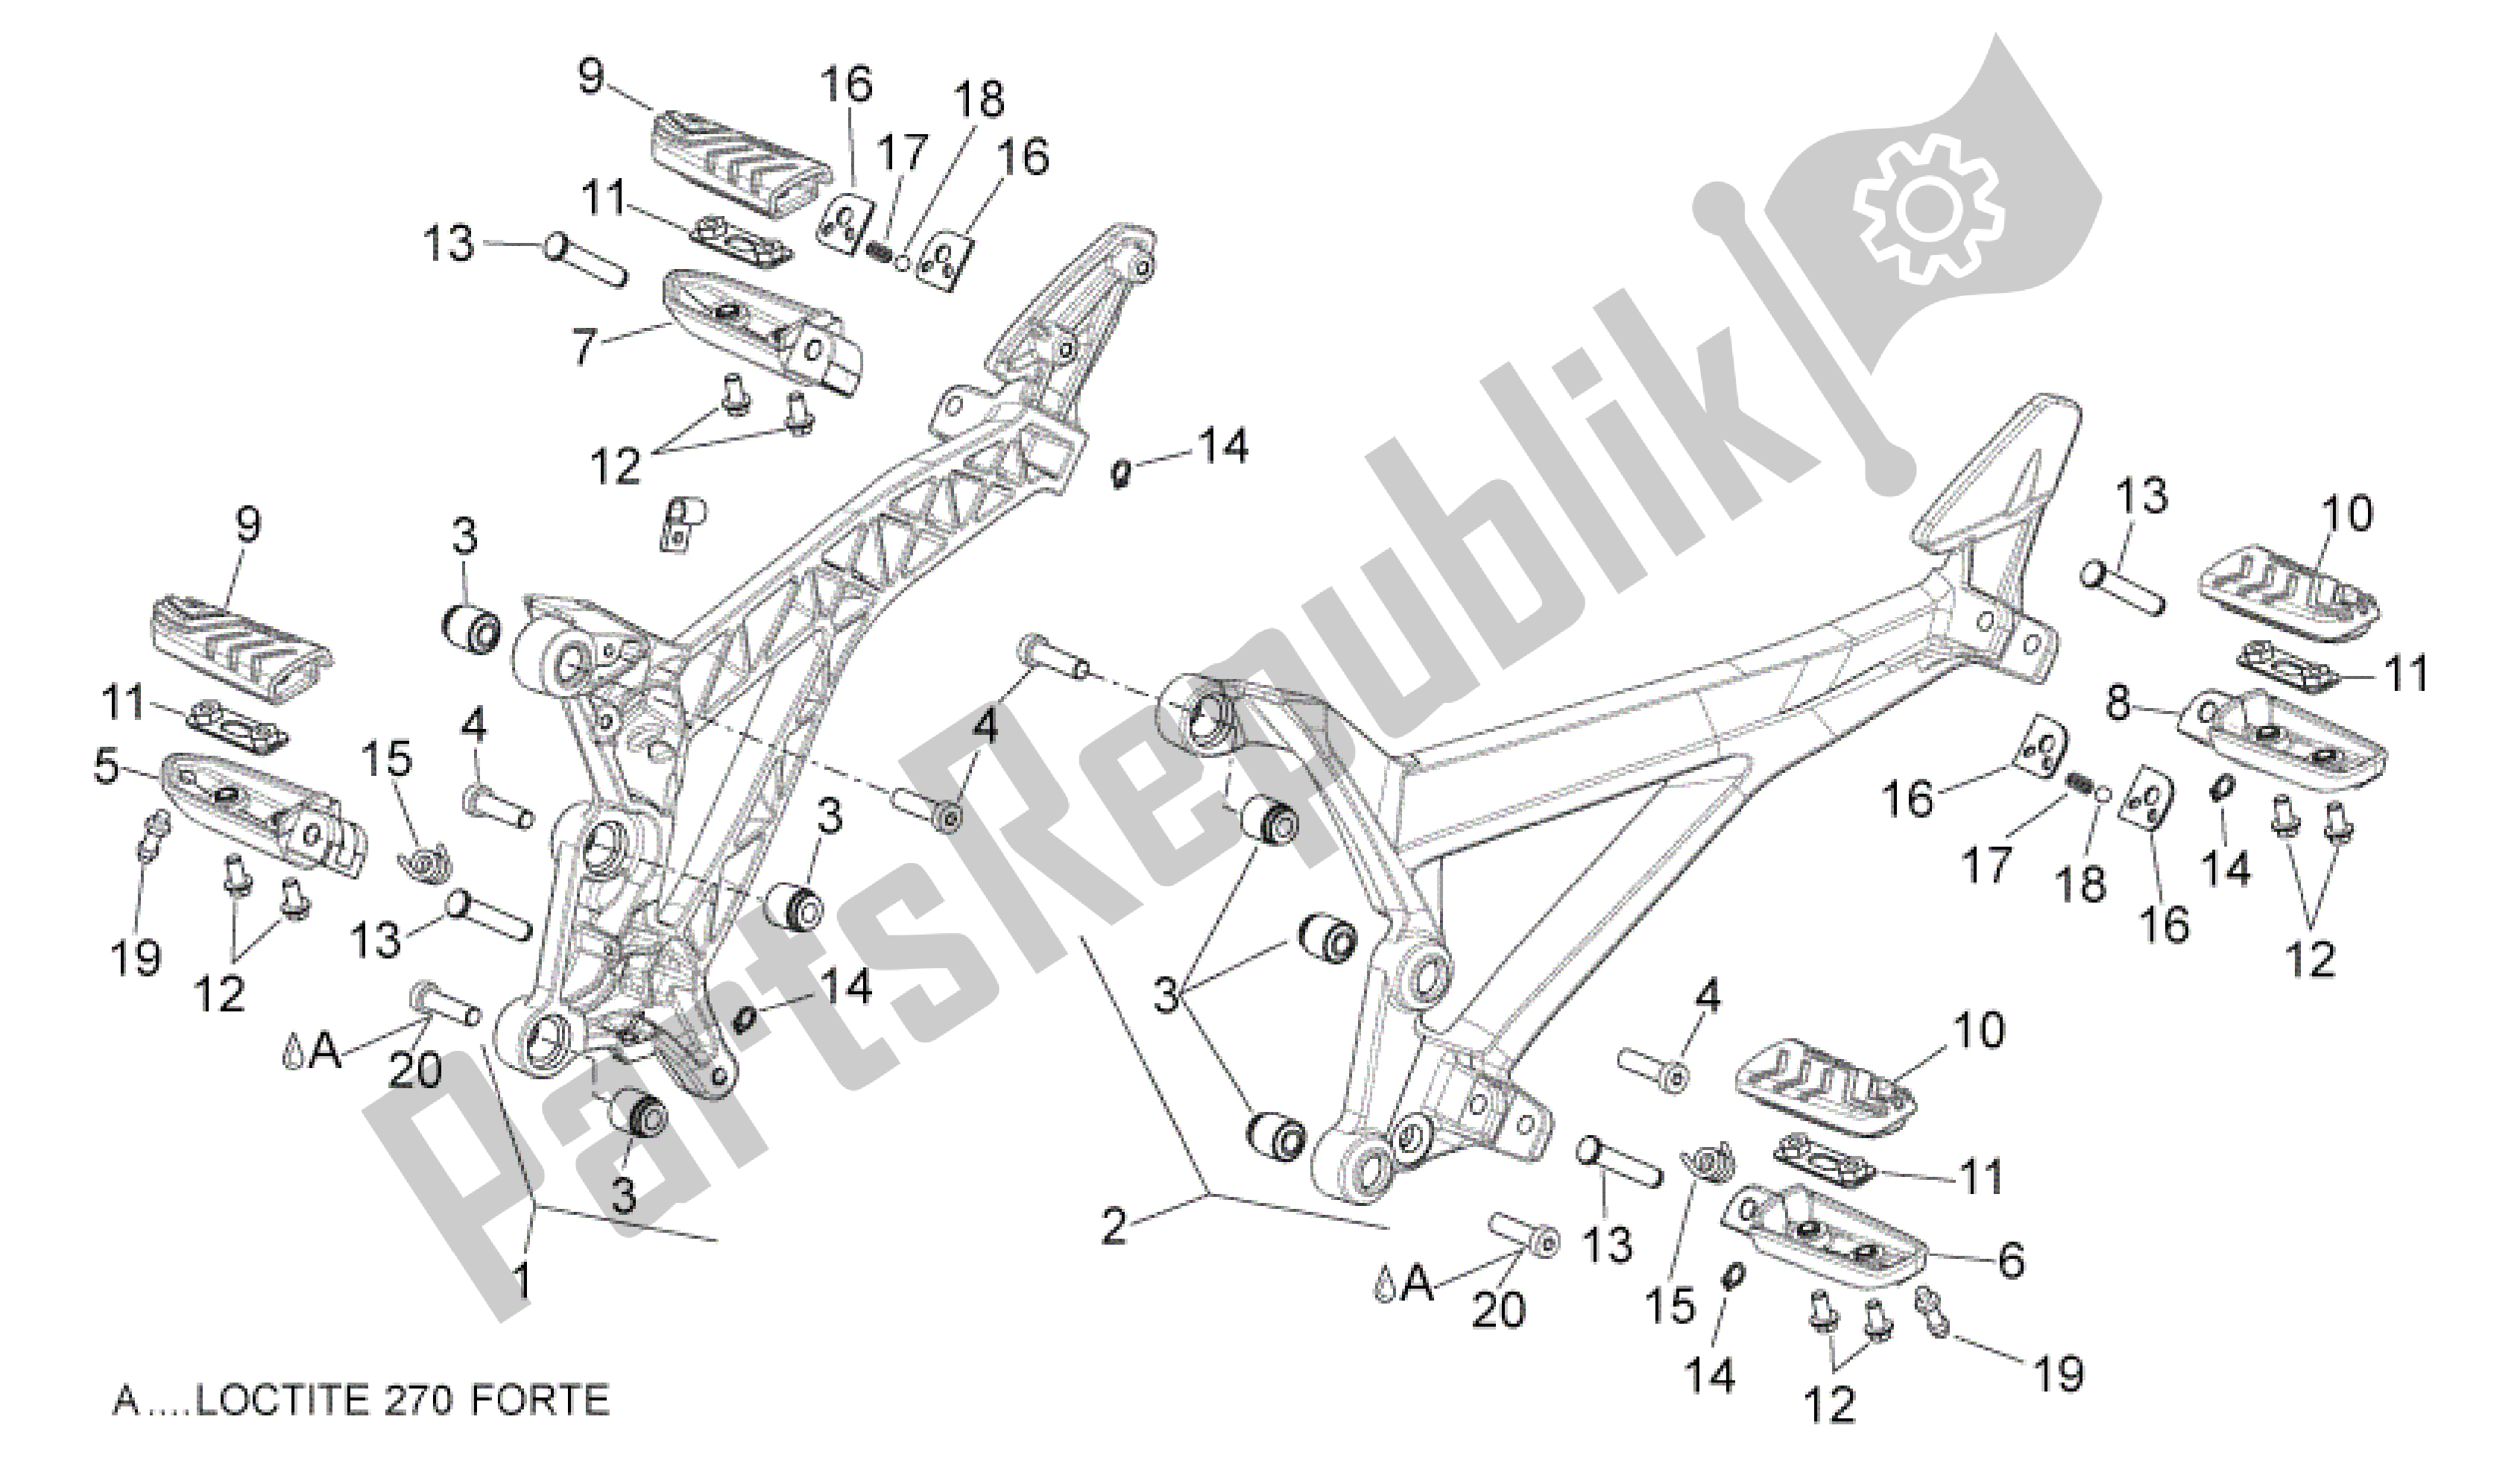 All parts for the Foot Rests of the Aprilia Shiver 750 2009